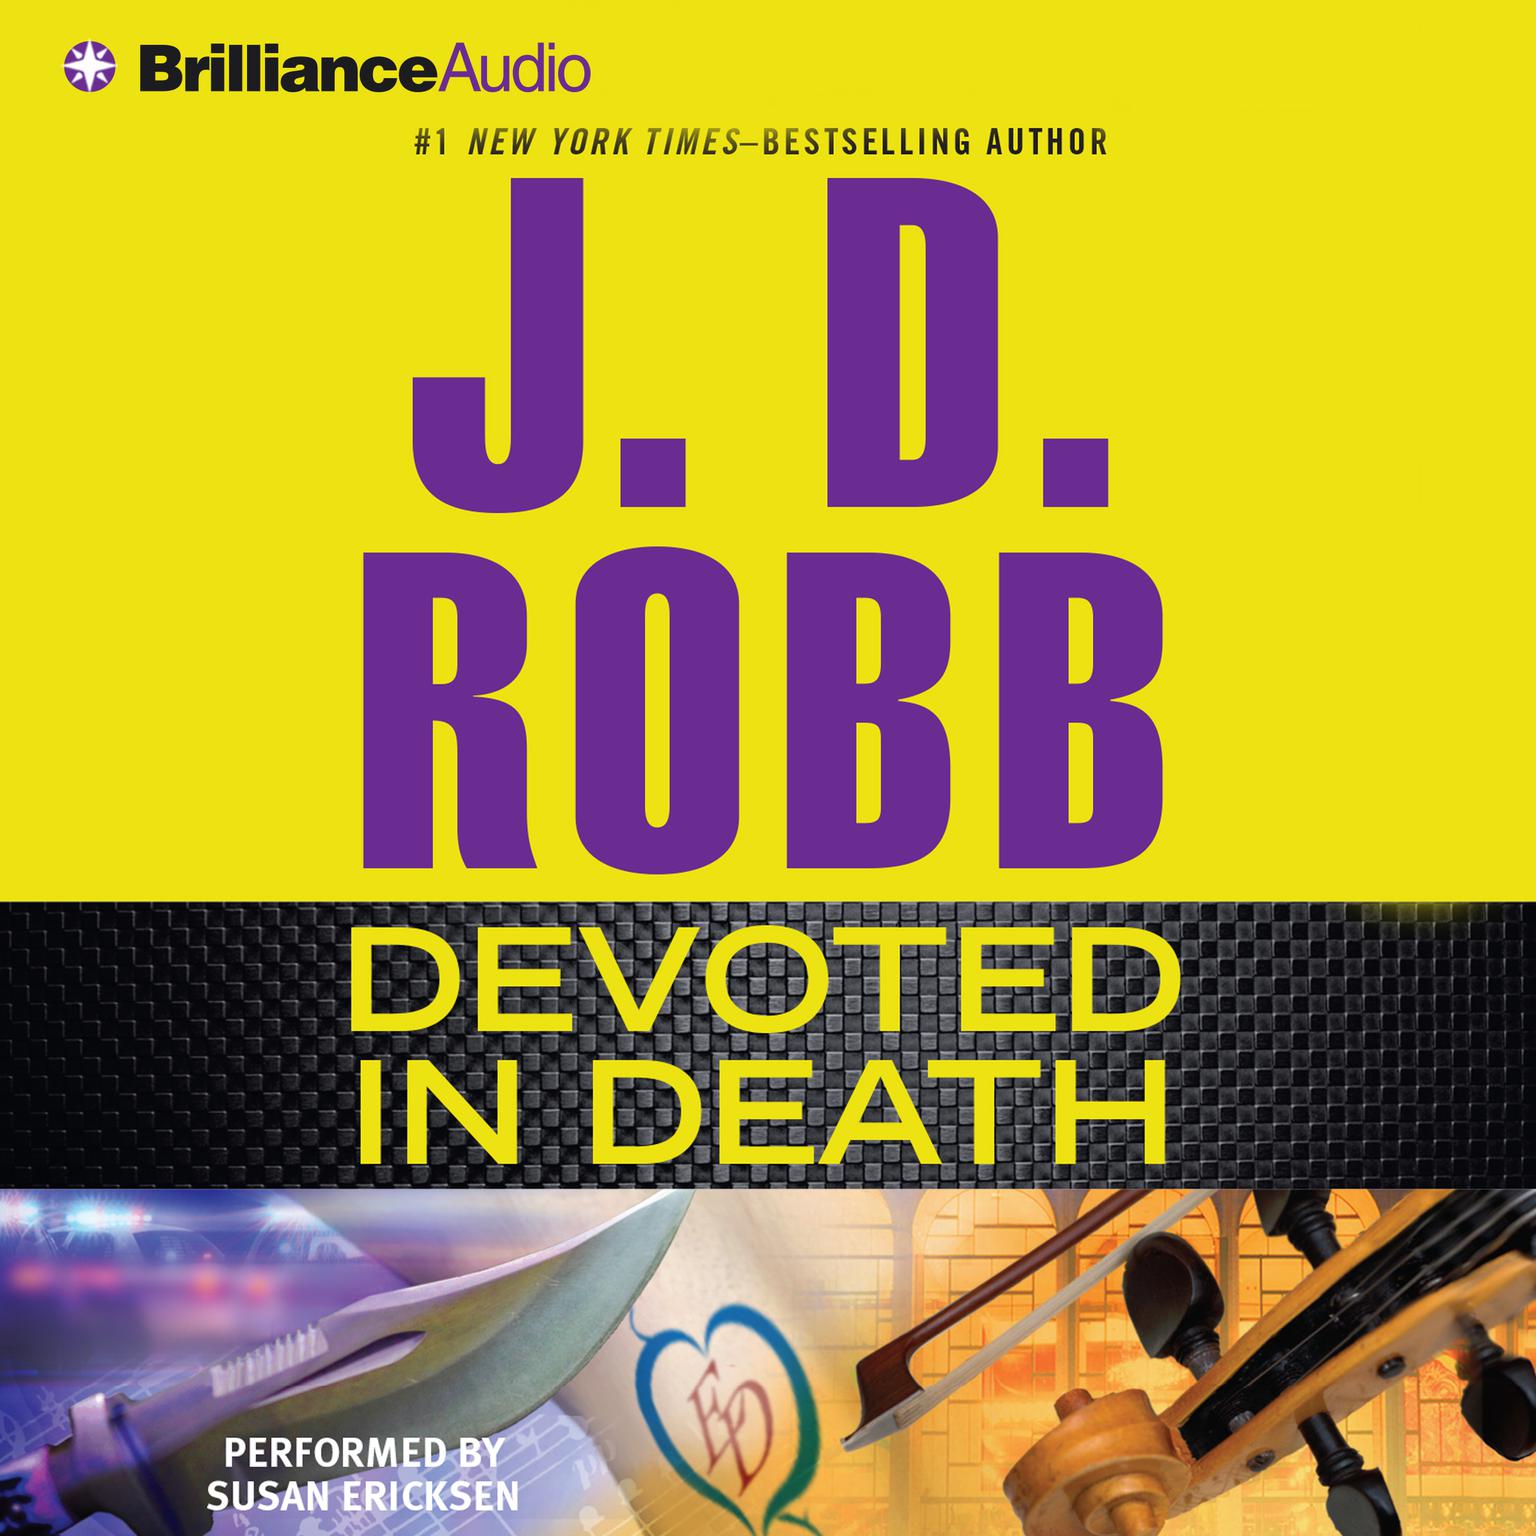 Devoted in Death (Abridged) Audiobook, by J. D. Robb